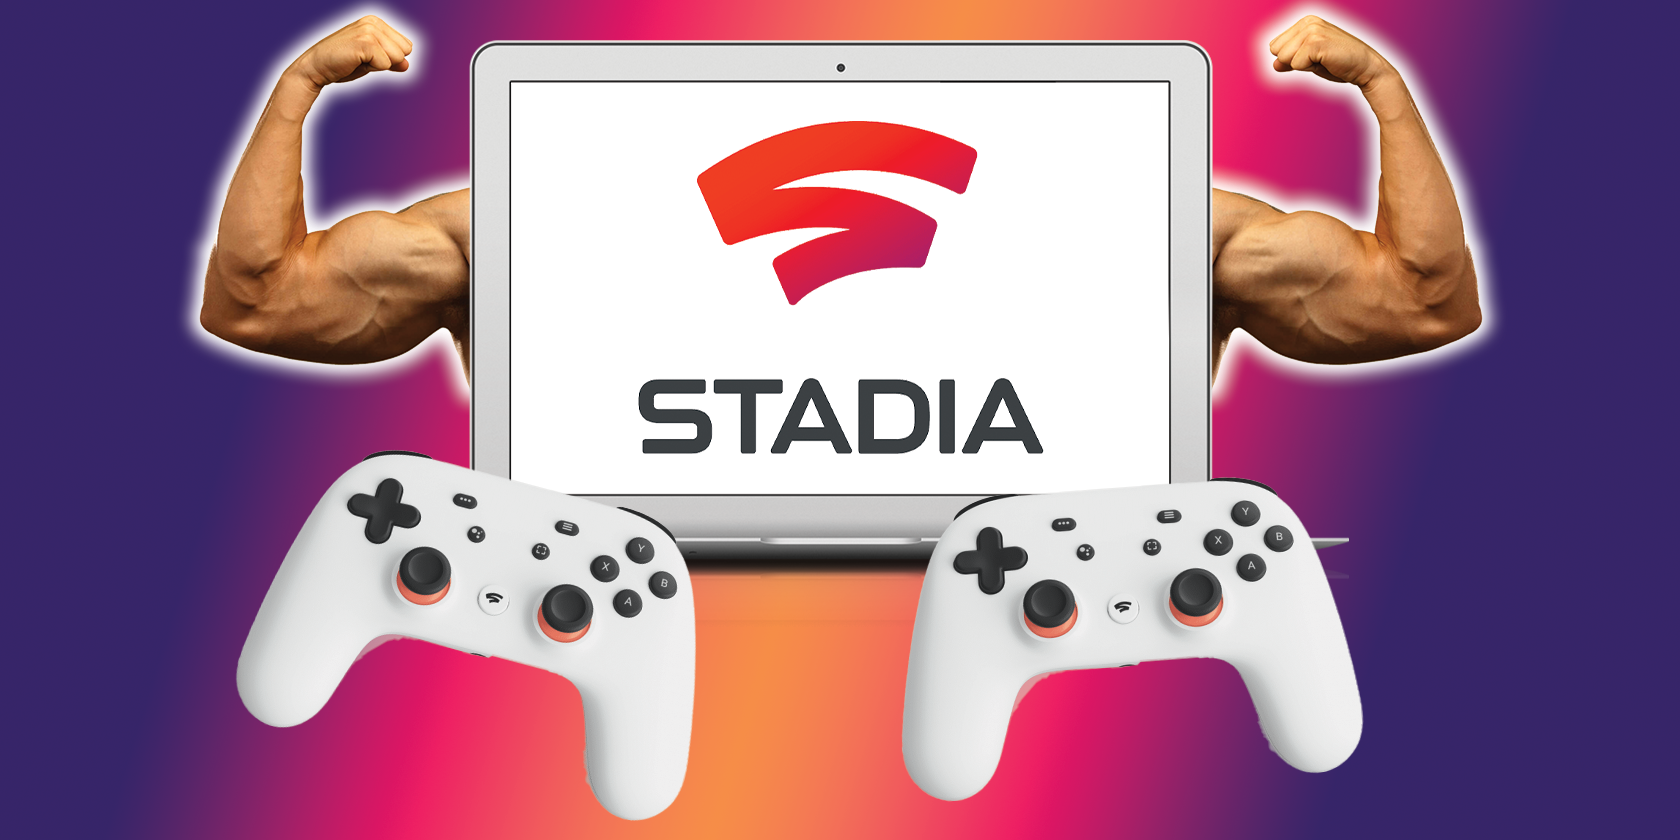 stadia on laptop with stadia controllers